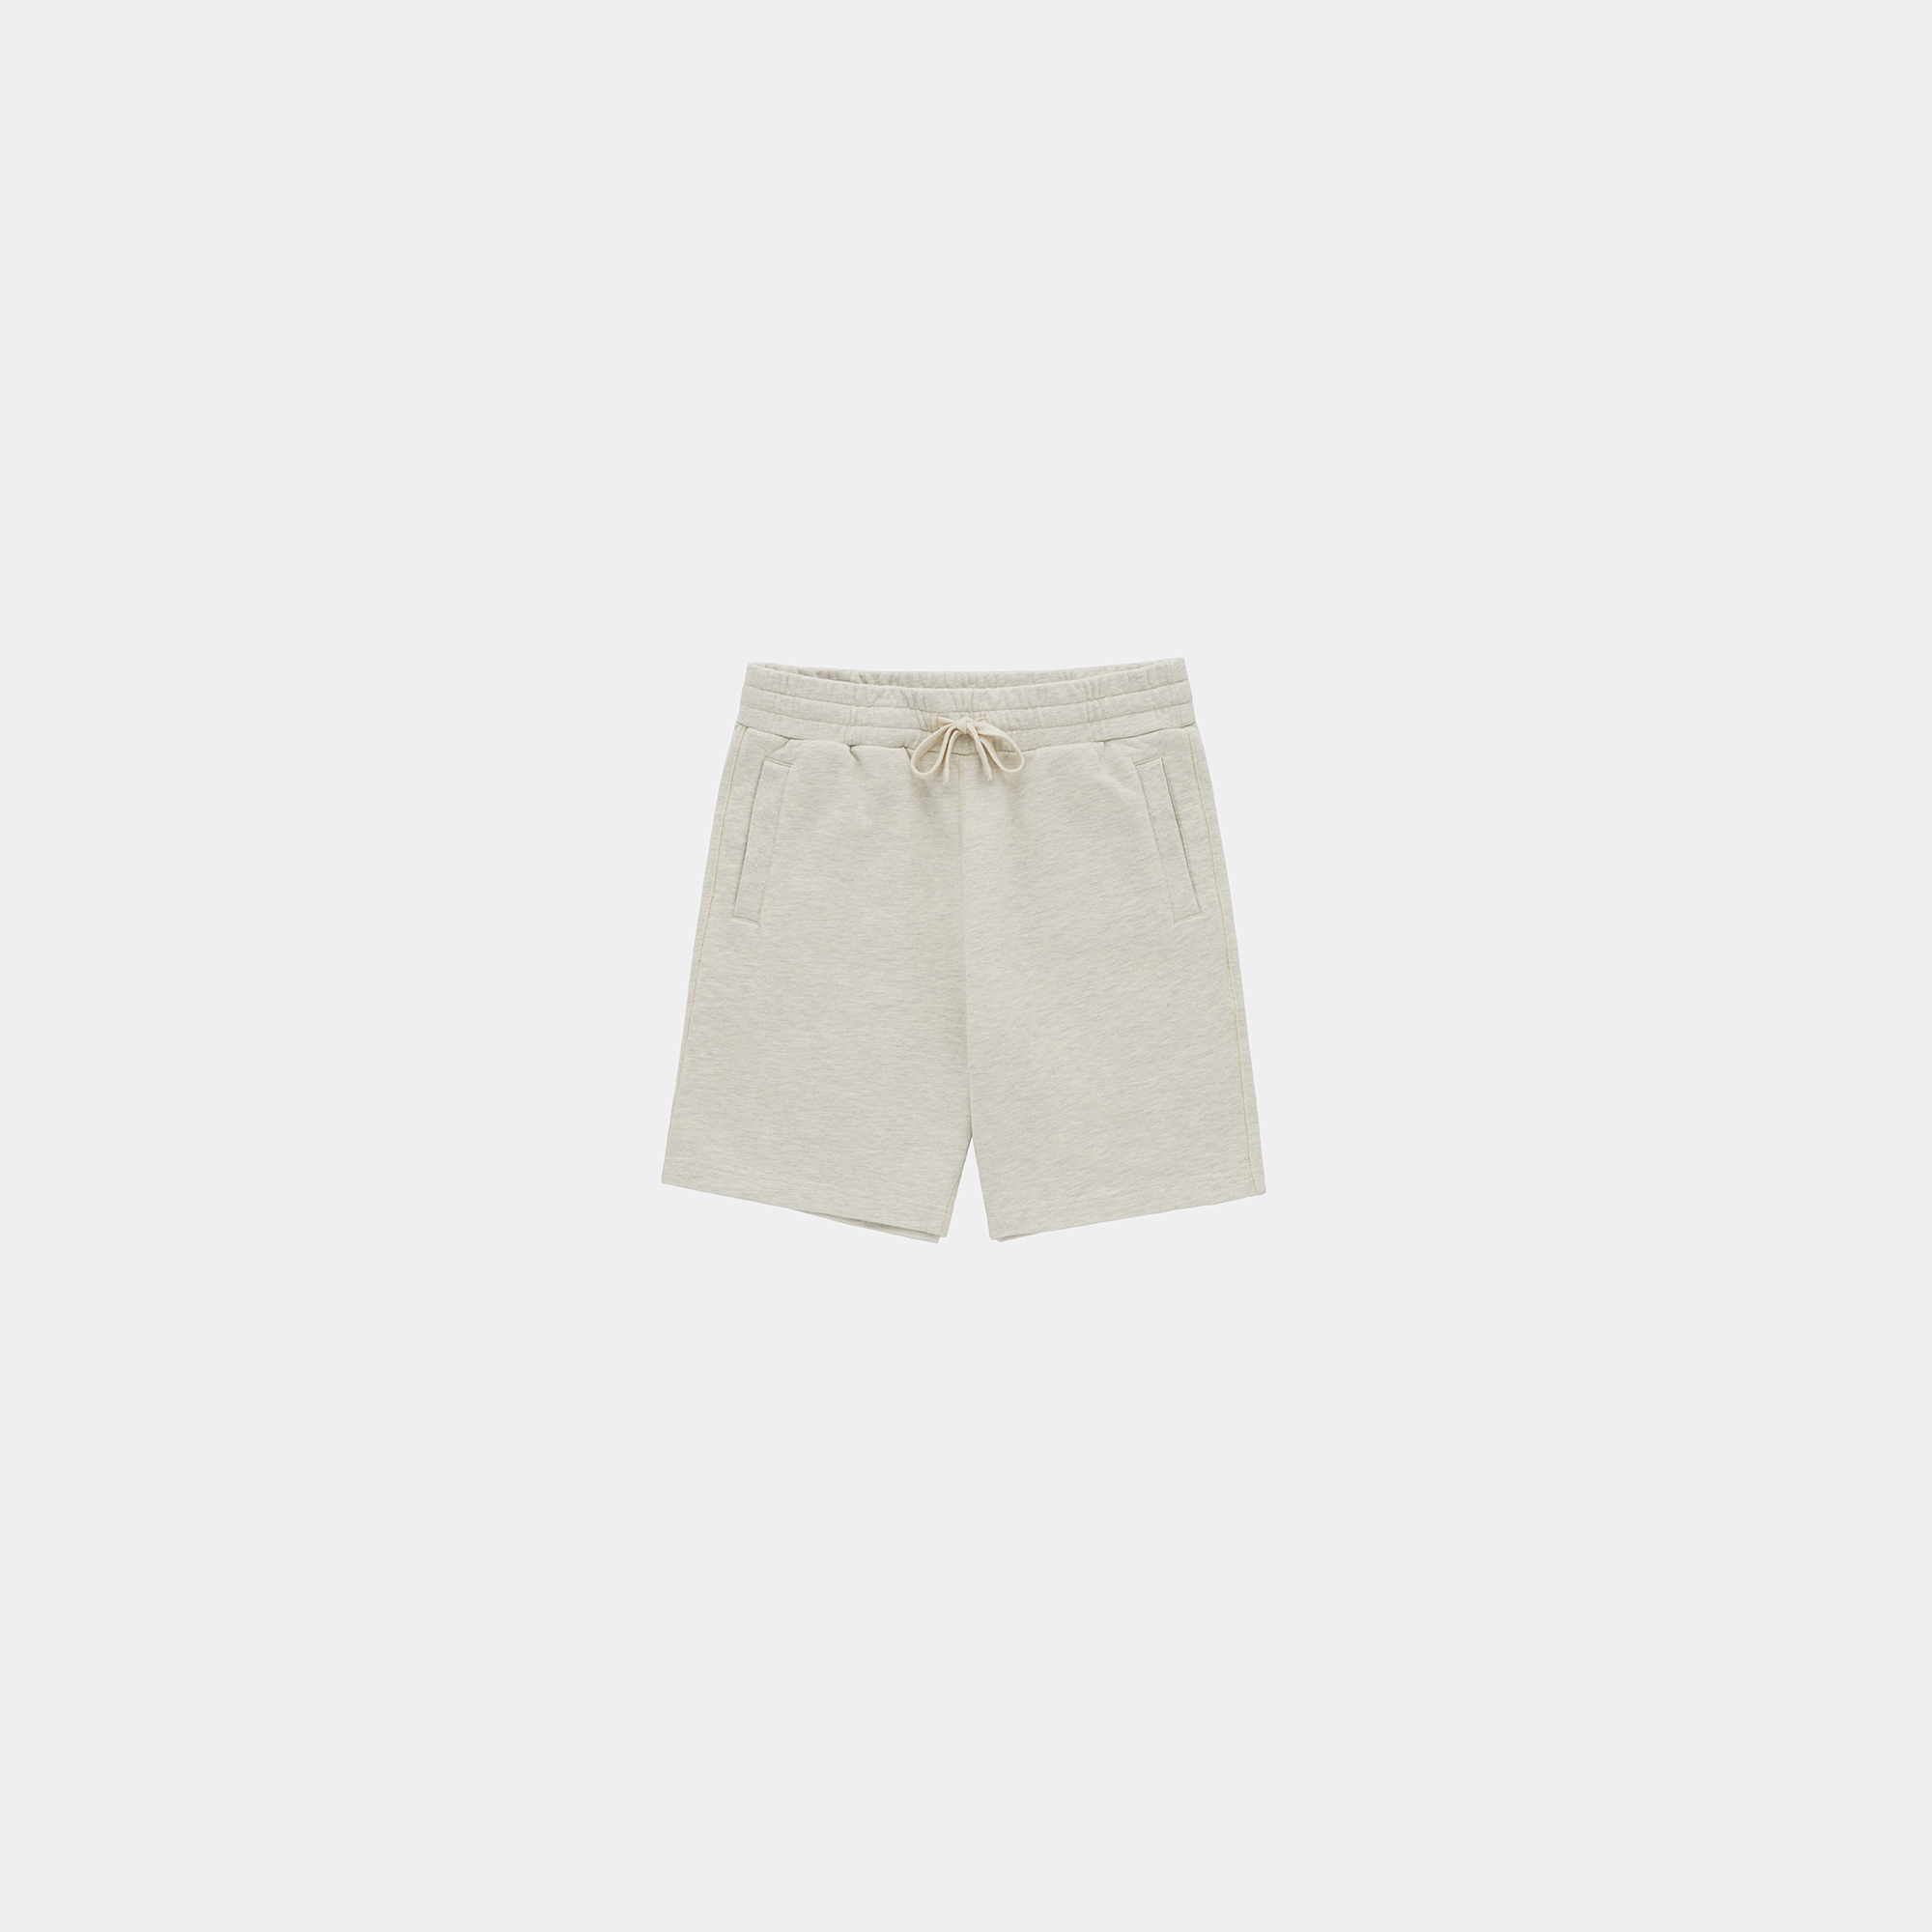 Lounge & Leisure Shorts (Oatmeal) - Front - PNG